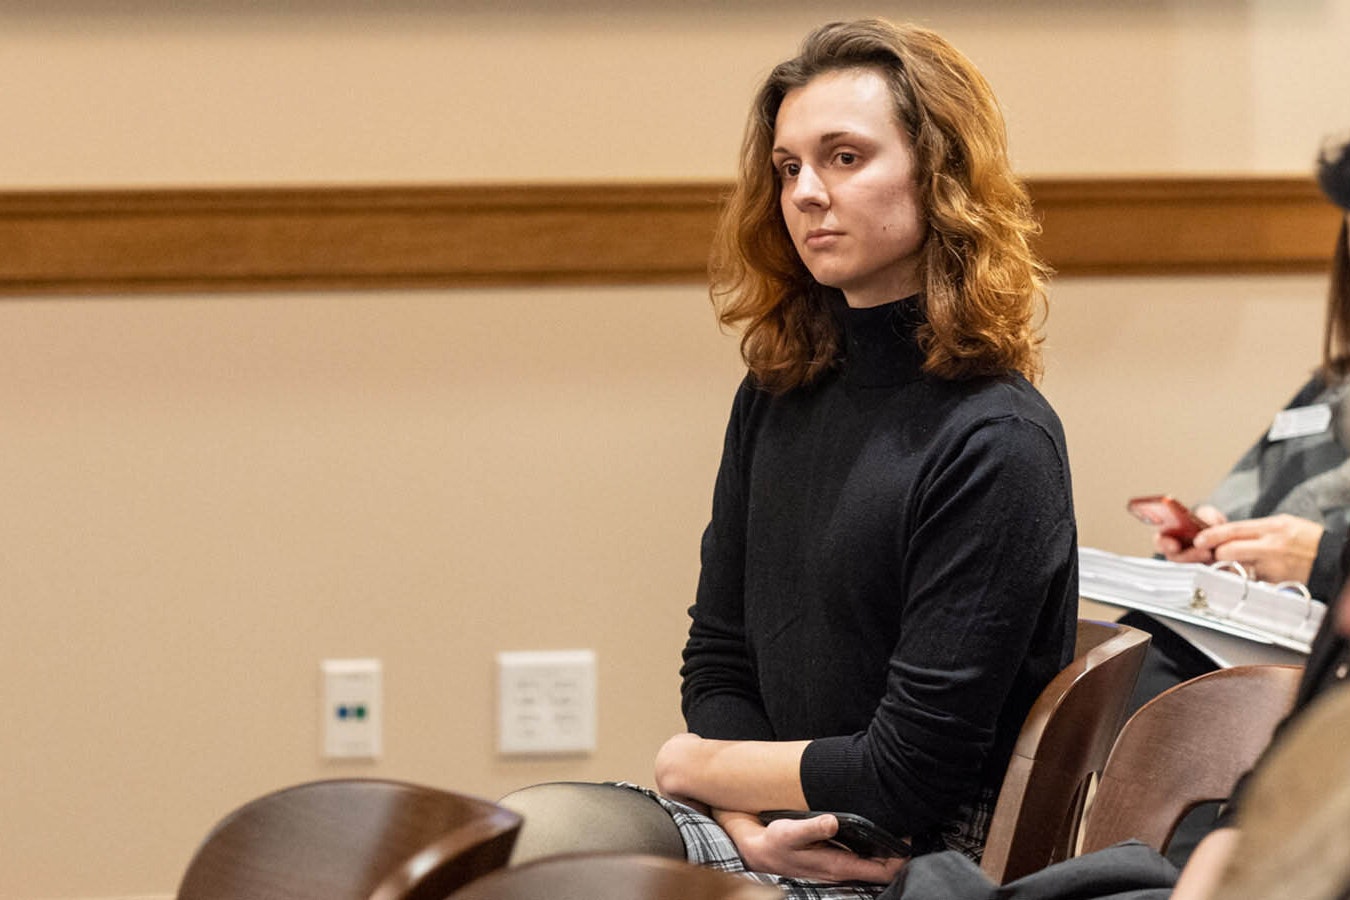 Luka Hein, a detransitioner who regrets taking hormones and having surgery as a teenager, testified in in support of Chloe's Law during the 2023 legislative session. Hein now lives as a young woman in accordance with her biological sex. Chole's Law failed, but a new bill outlawing transgender surgeries for children will be considered in the upcoming session.